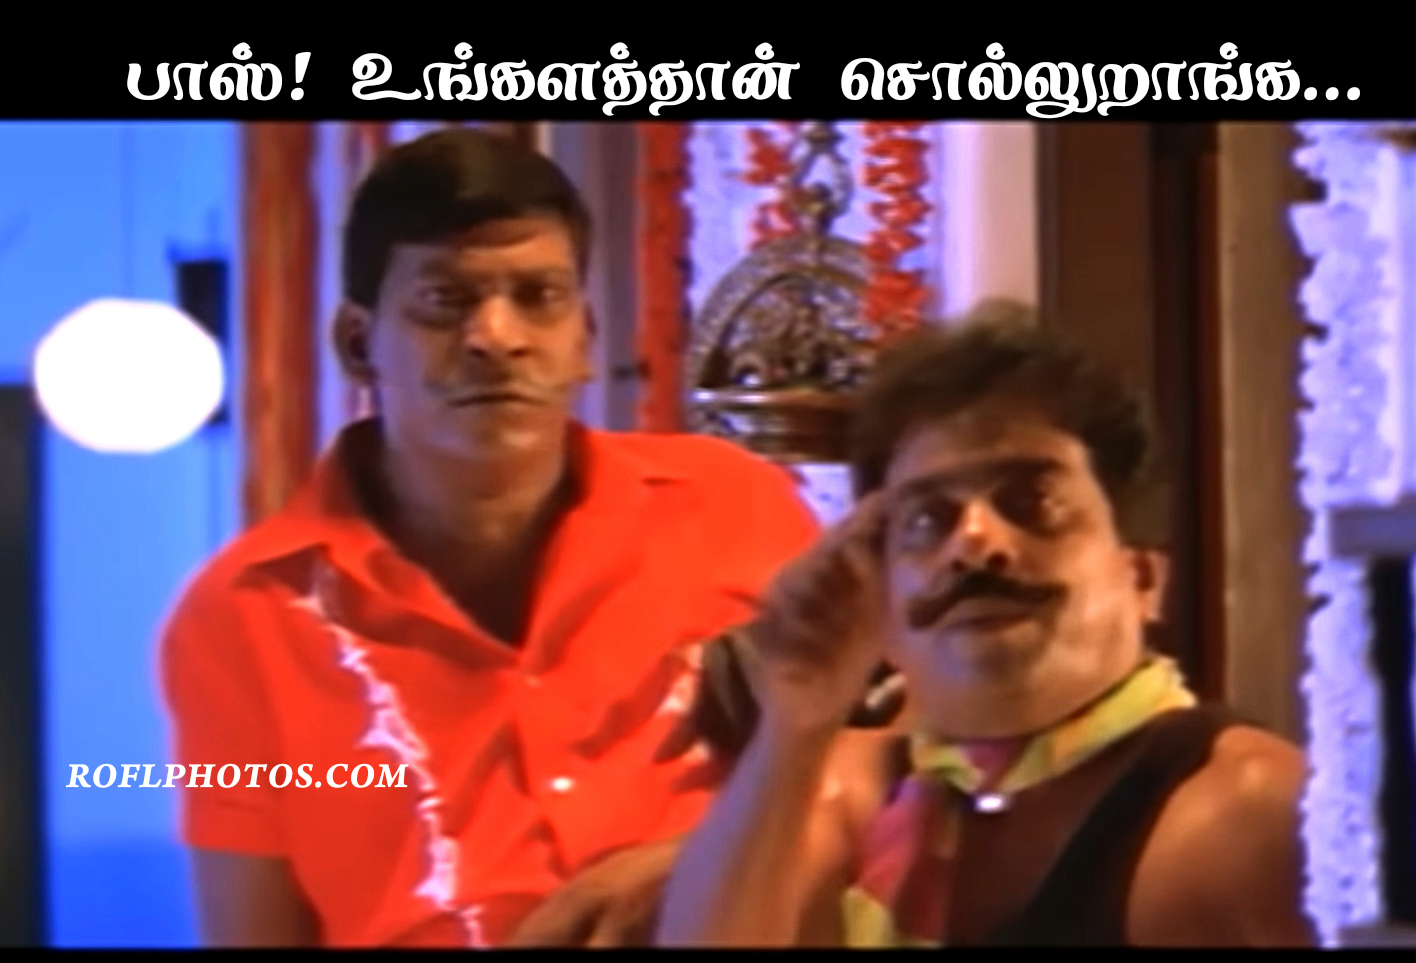 Tamil Funny Memes Videos Download You can free download the latest. tamil funny memes videos download